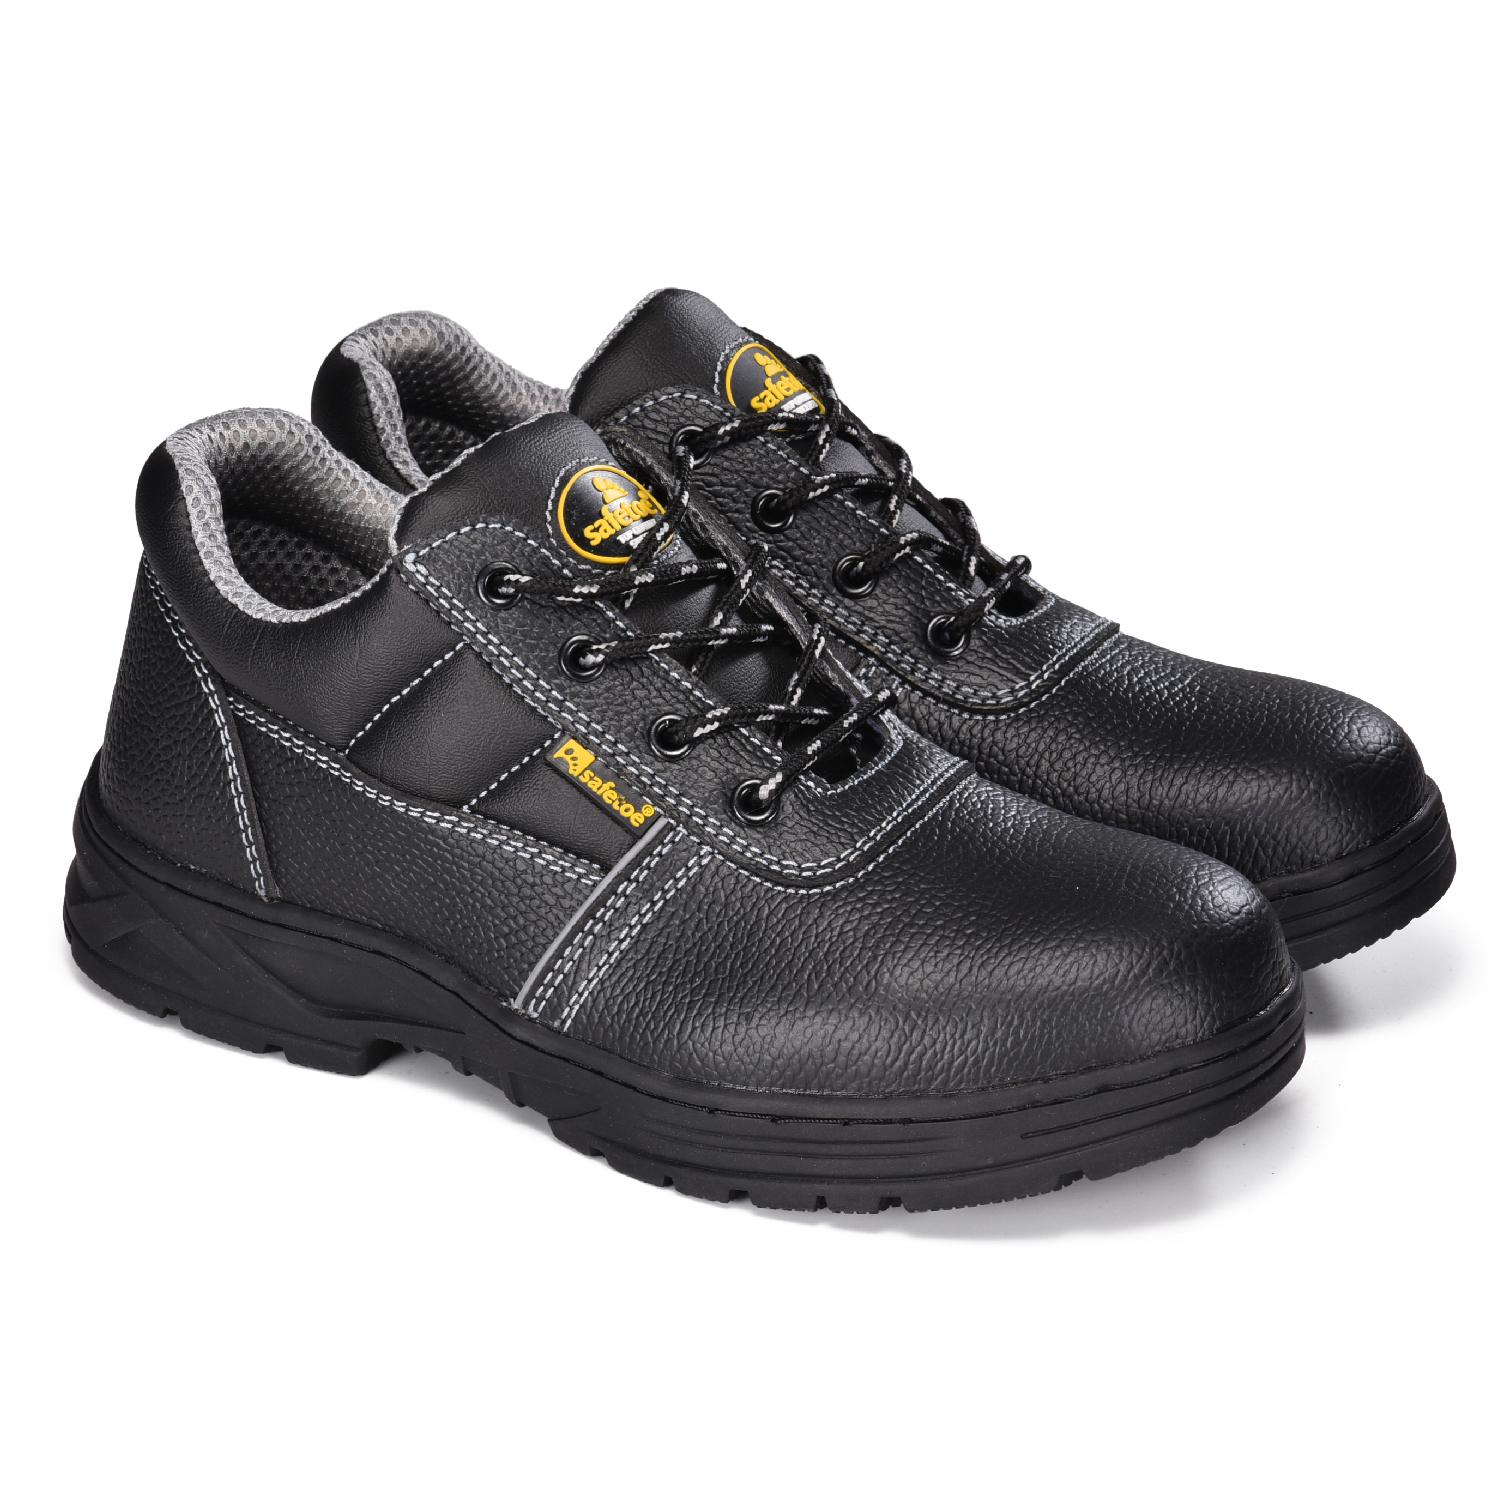 Mining Steel Toe Safety Work Shoes L-7006RB